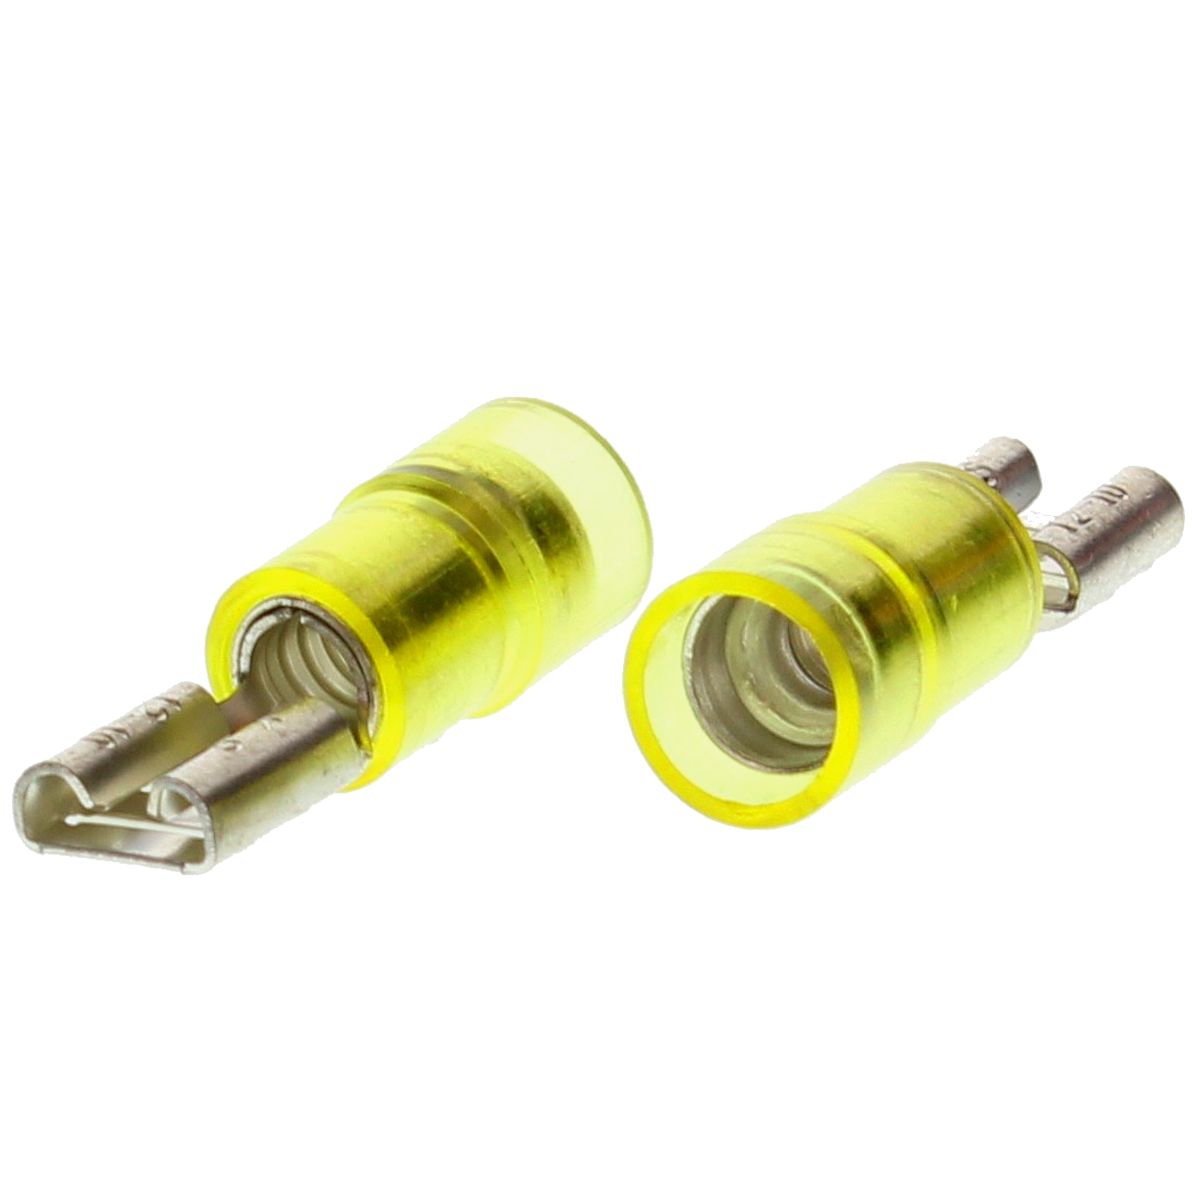 12-10 AWG Yellow Nylon Insulated (.250"/6.35 mm) Female Quick Connectors, 50/PKG